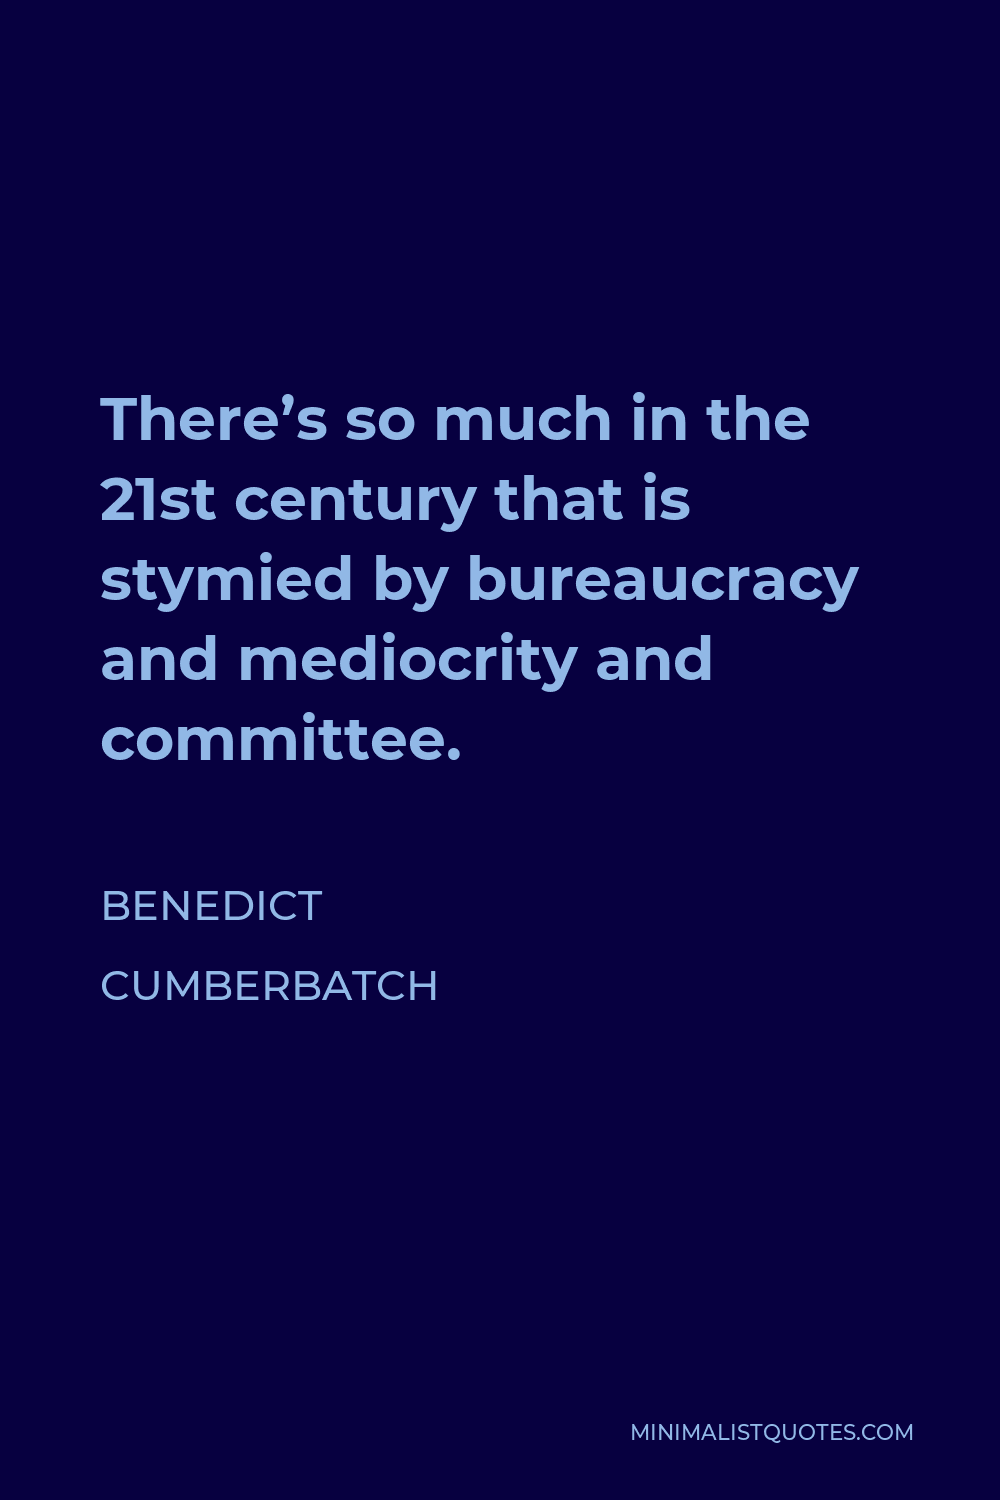 Benedict Cumberbatch Quote - There’s so much in the 21st century that is stymied by bureaucracy and mediocrity and committee.